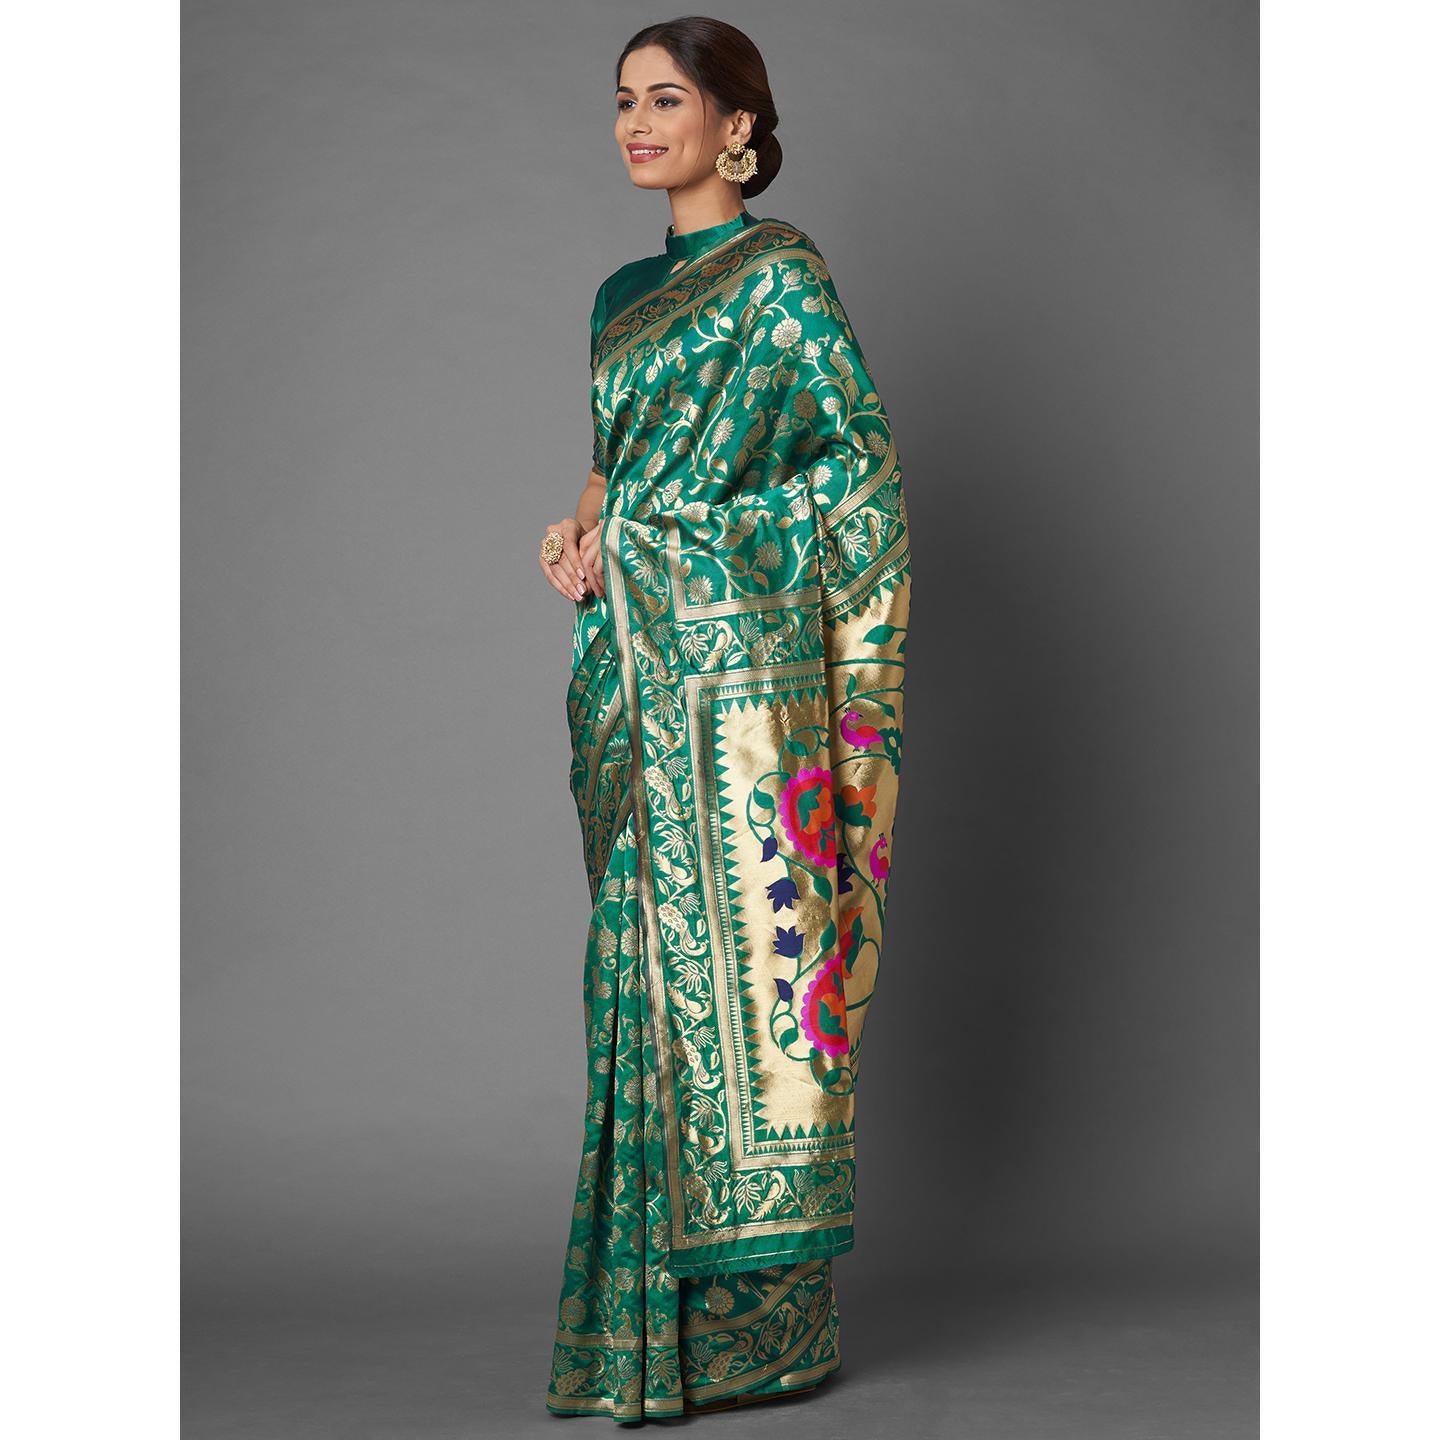 Saree Mall Teal Green Party Wear Silk Blend Floral Designer Banarasi Saree With Unstitched Blouse - Peachmode